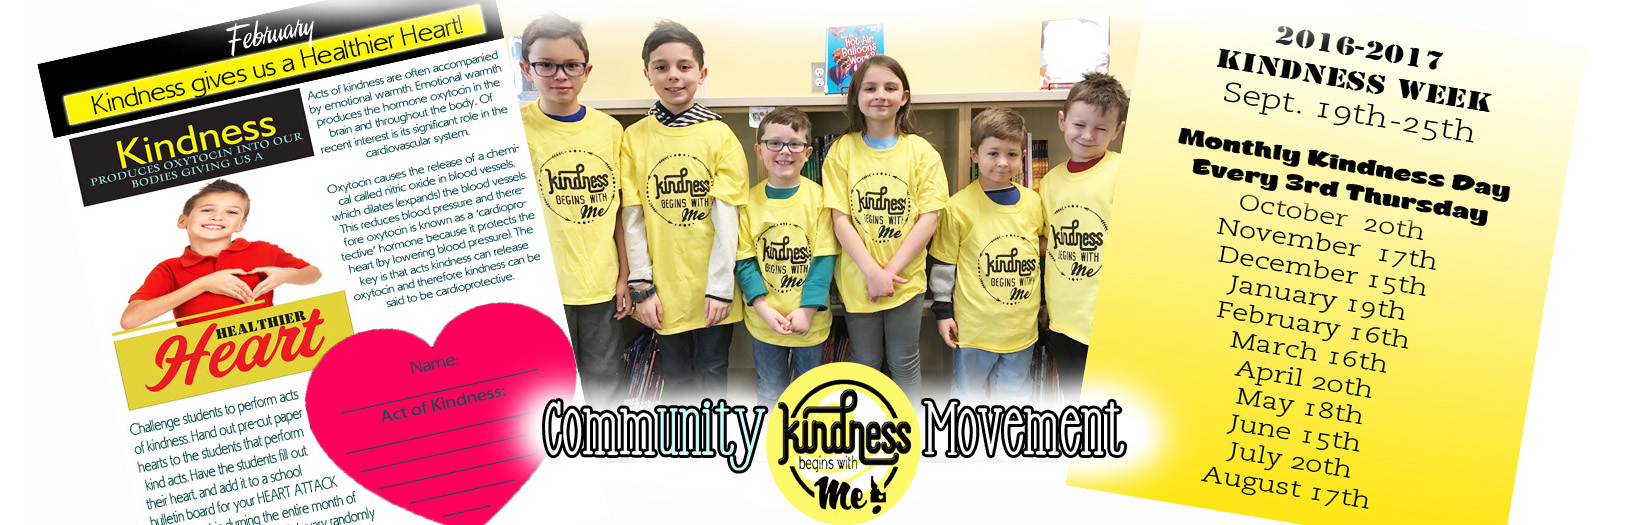 February Kindness Day is next Thursday, Feb. 16th!